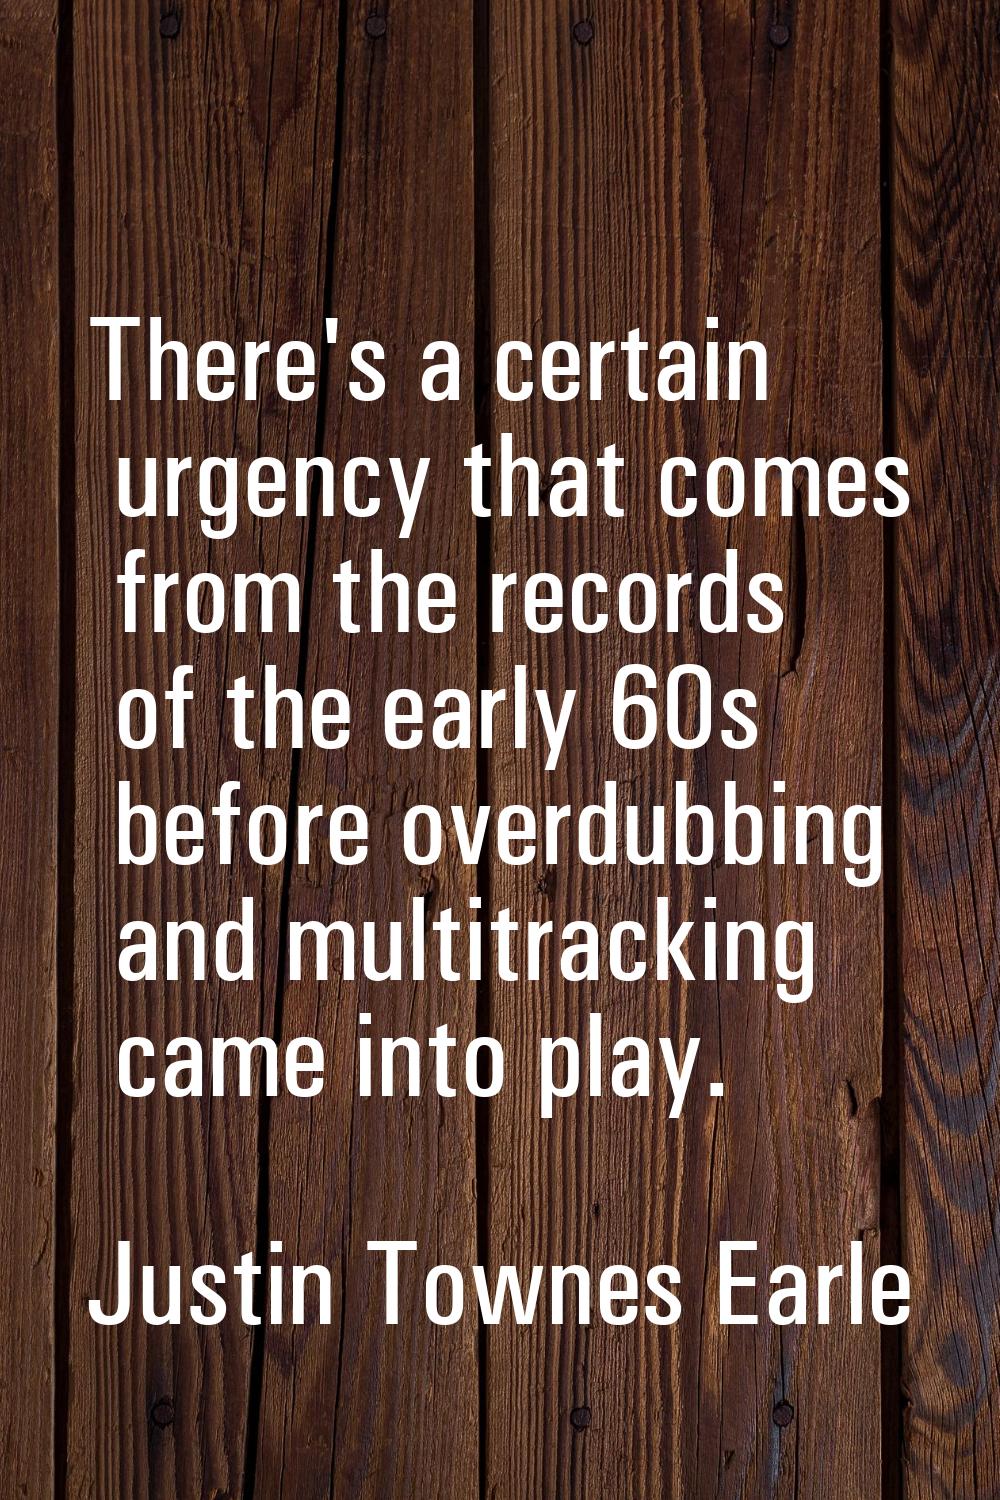 There's a certain urgency that comes from the records of the early 60s before overdubbing and multi